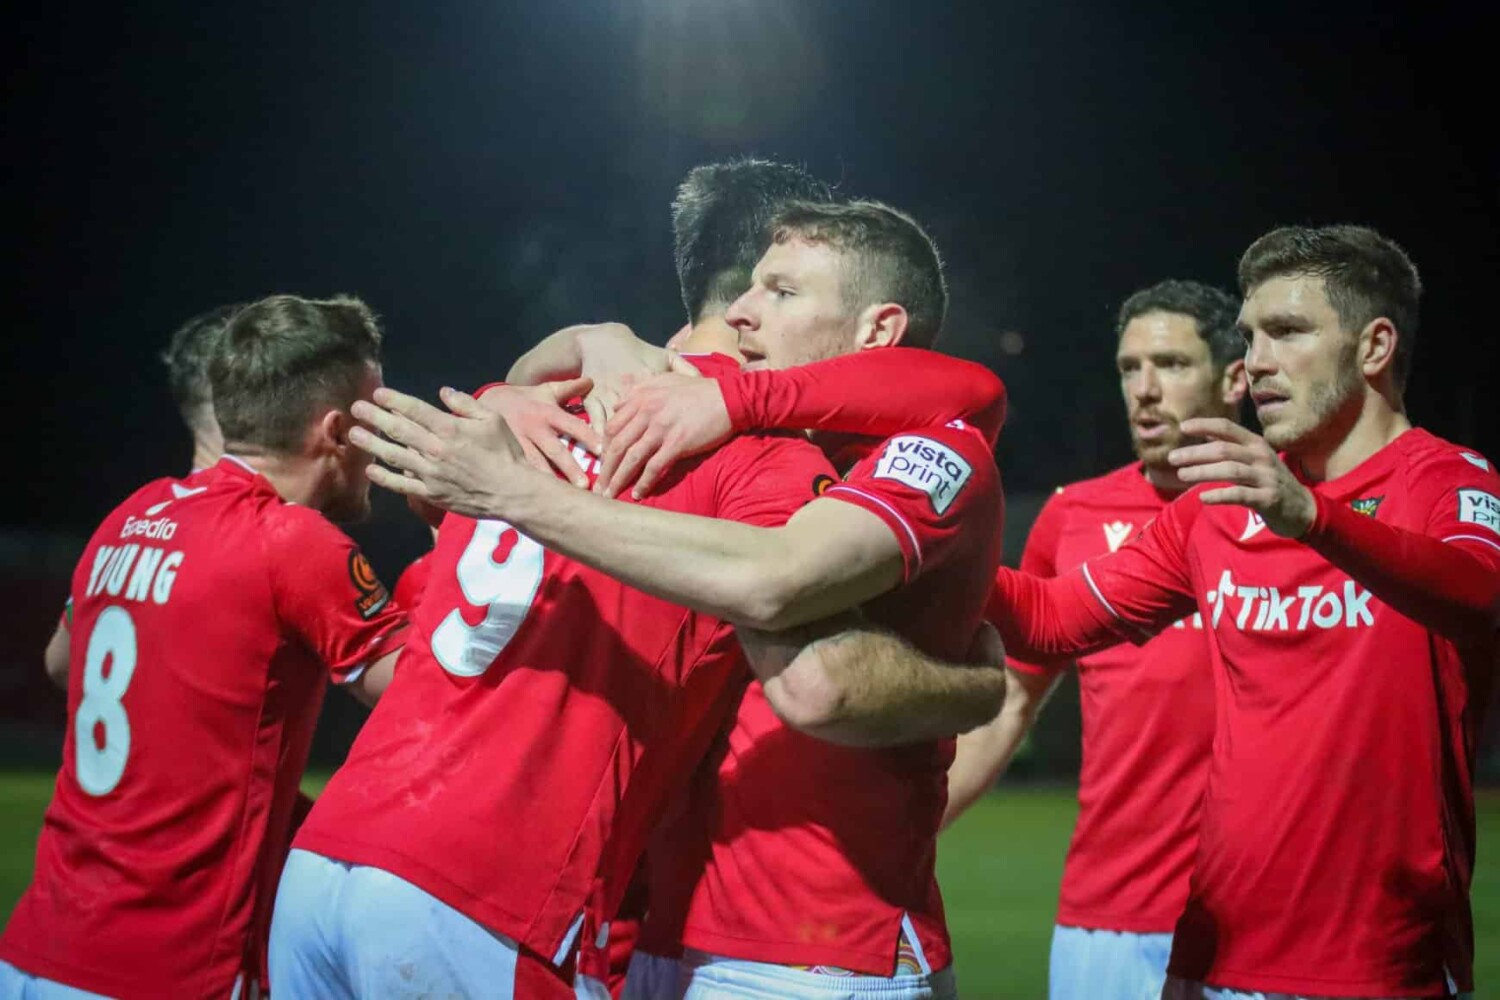 Wrexham Lowest Ranked Team Remaining in FA Cup